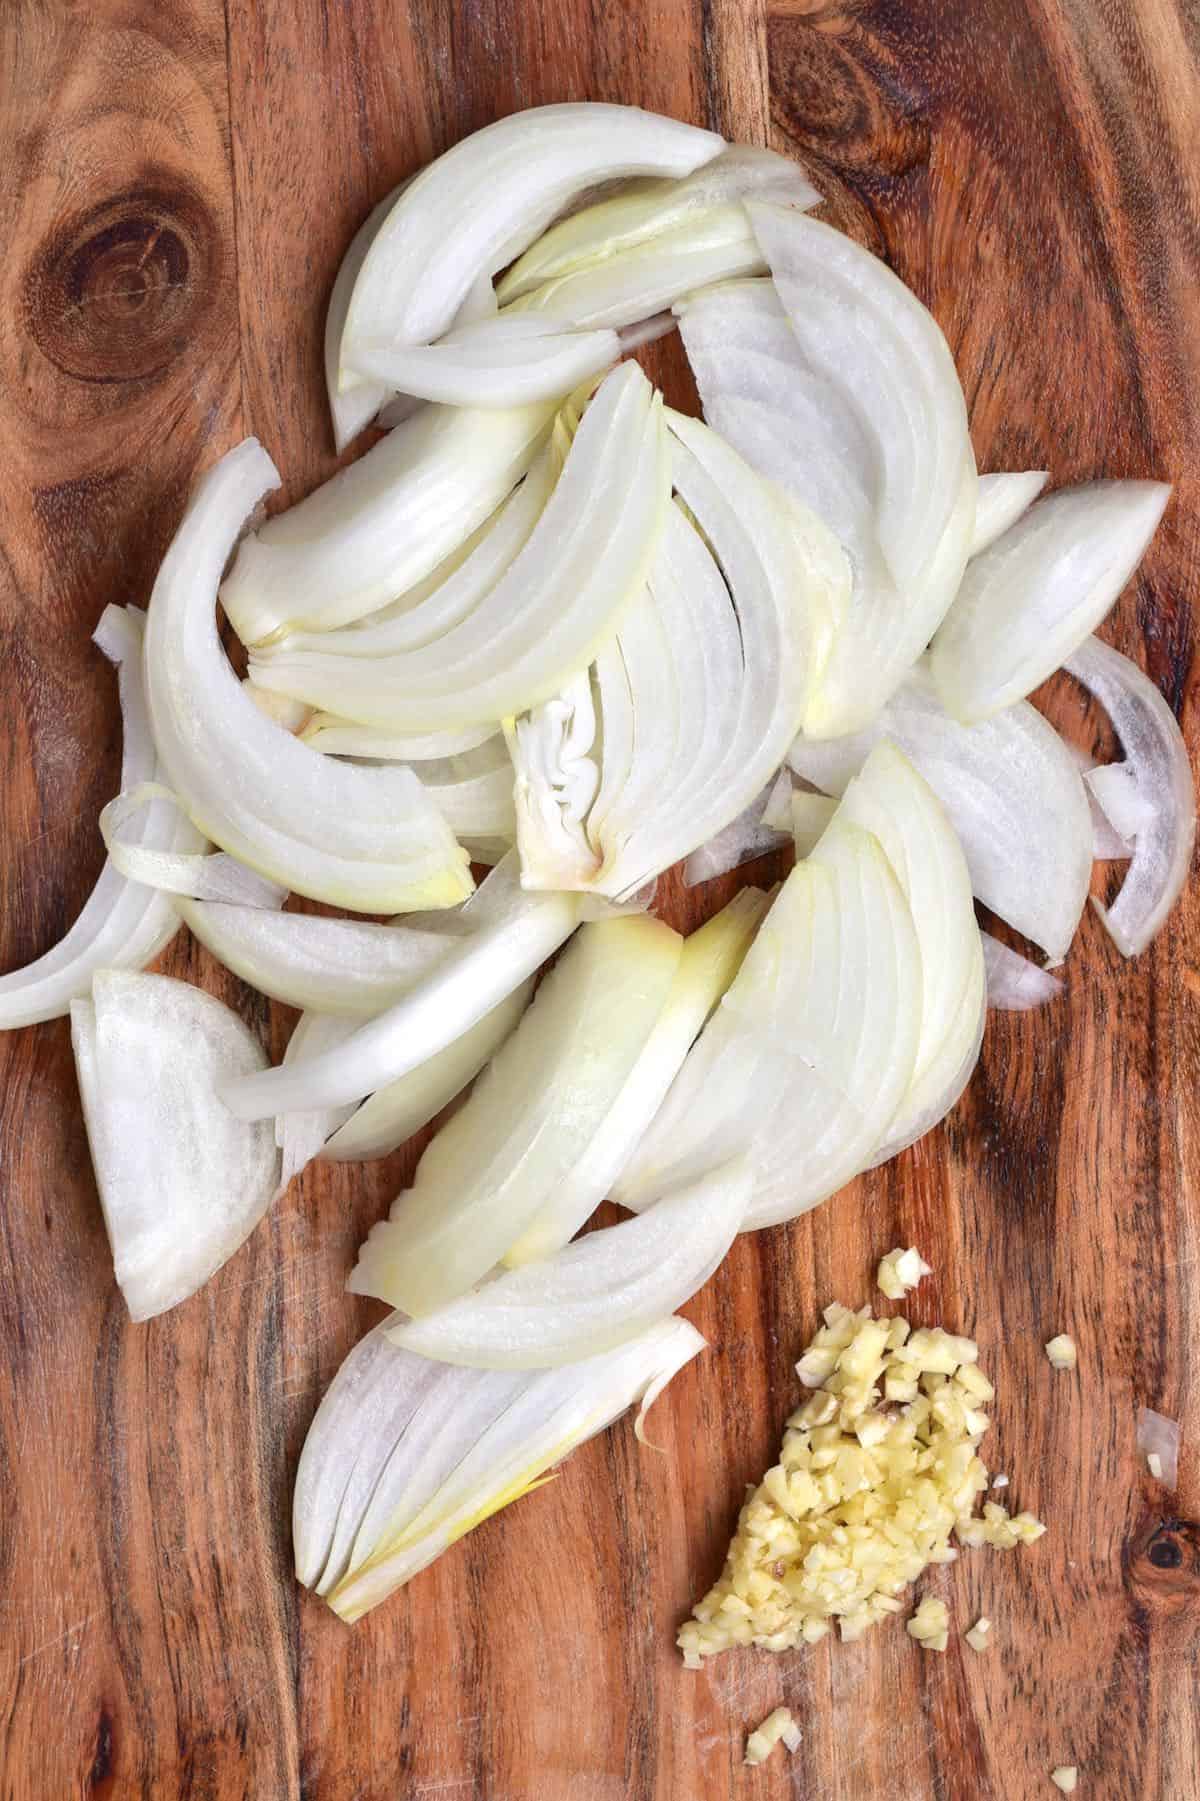 Chopped onion and garlic on a wooden board